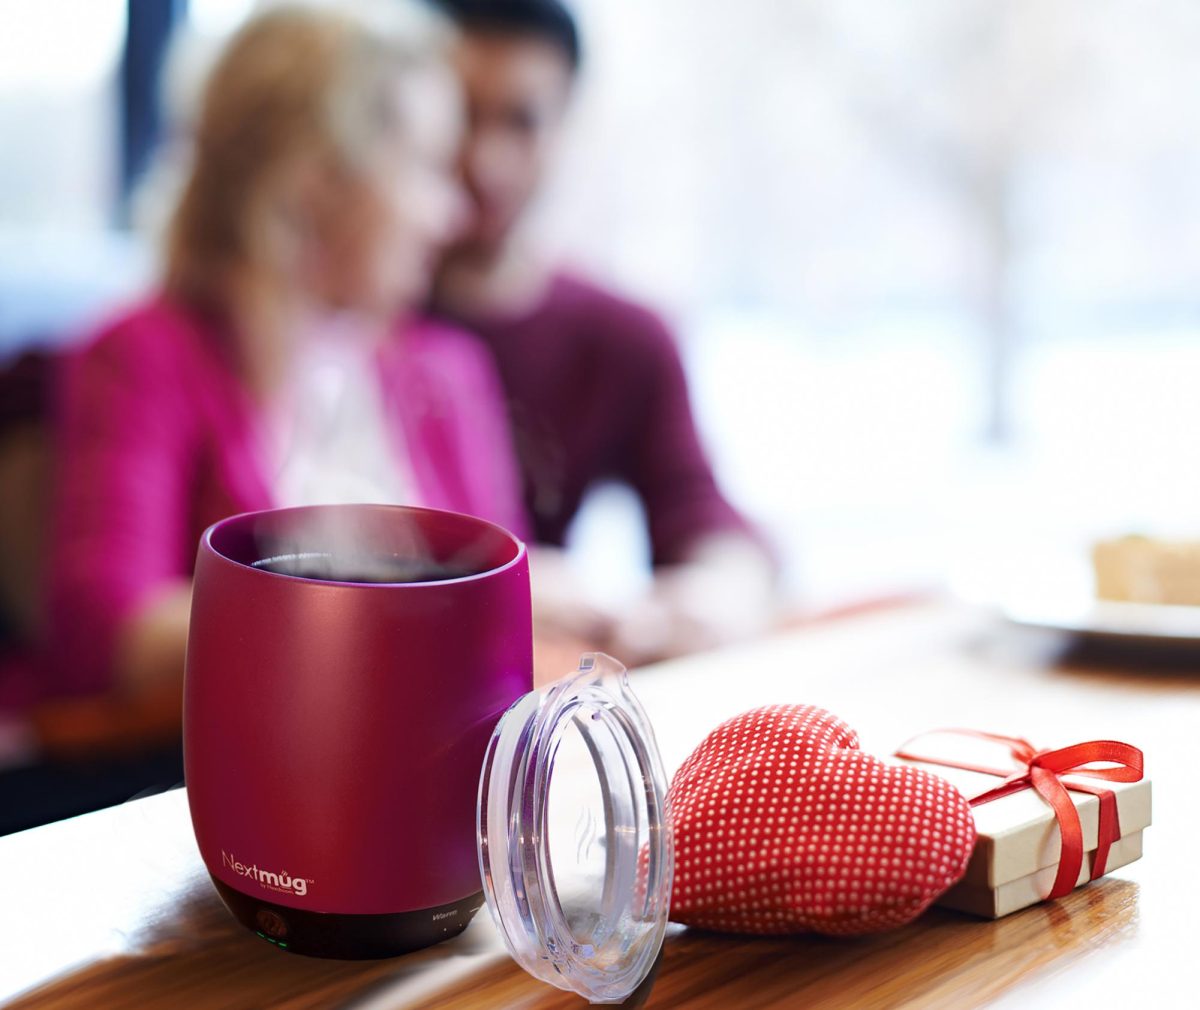 The Nextmug will keep your hot coffee or tea at the perfect temperature wherever you are. Ideal for home, the office or the home office. (Nextmug photo)